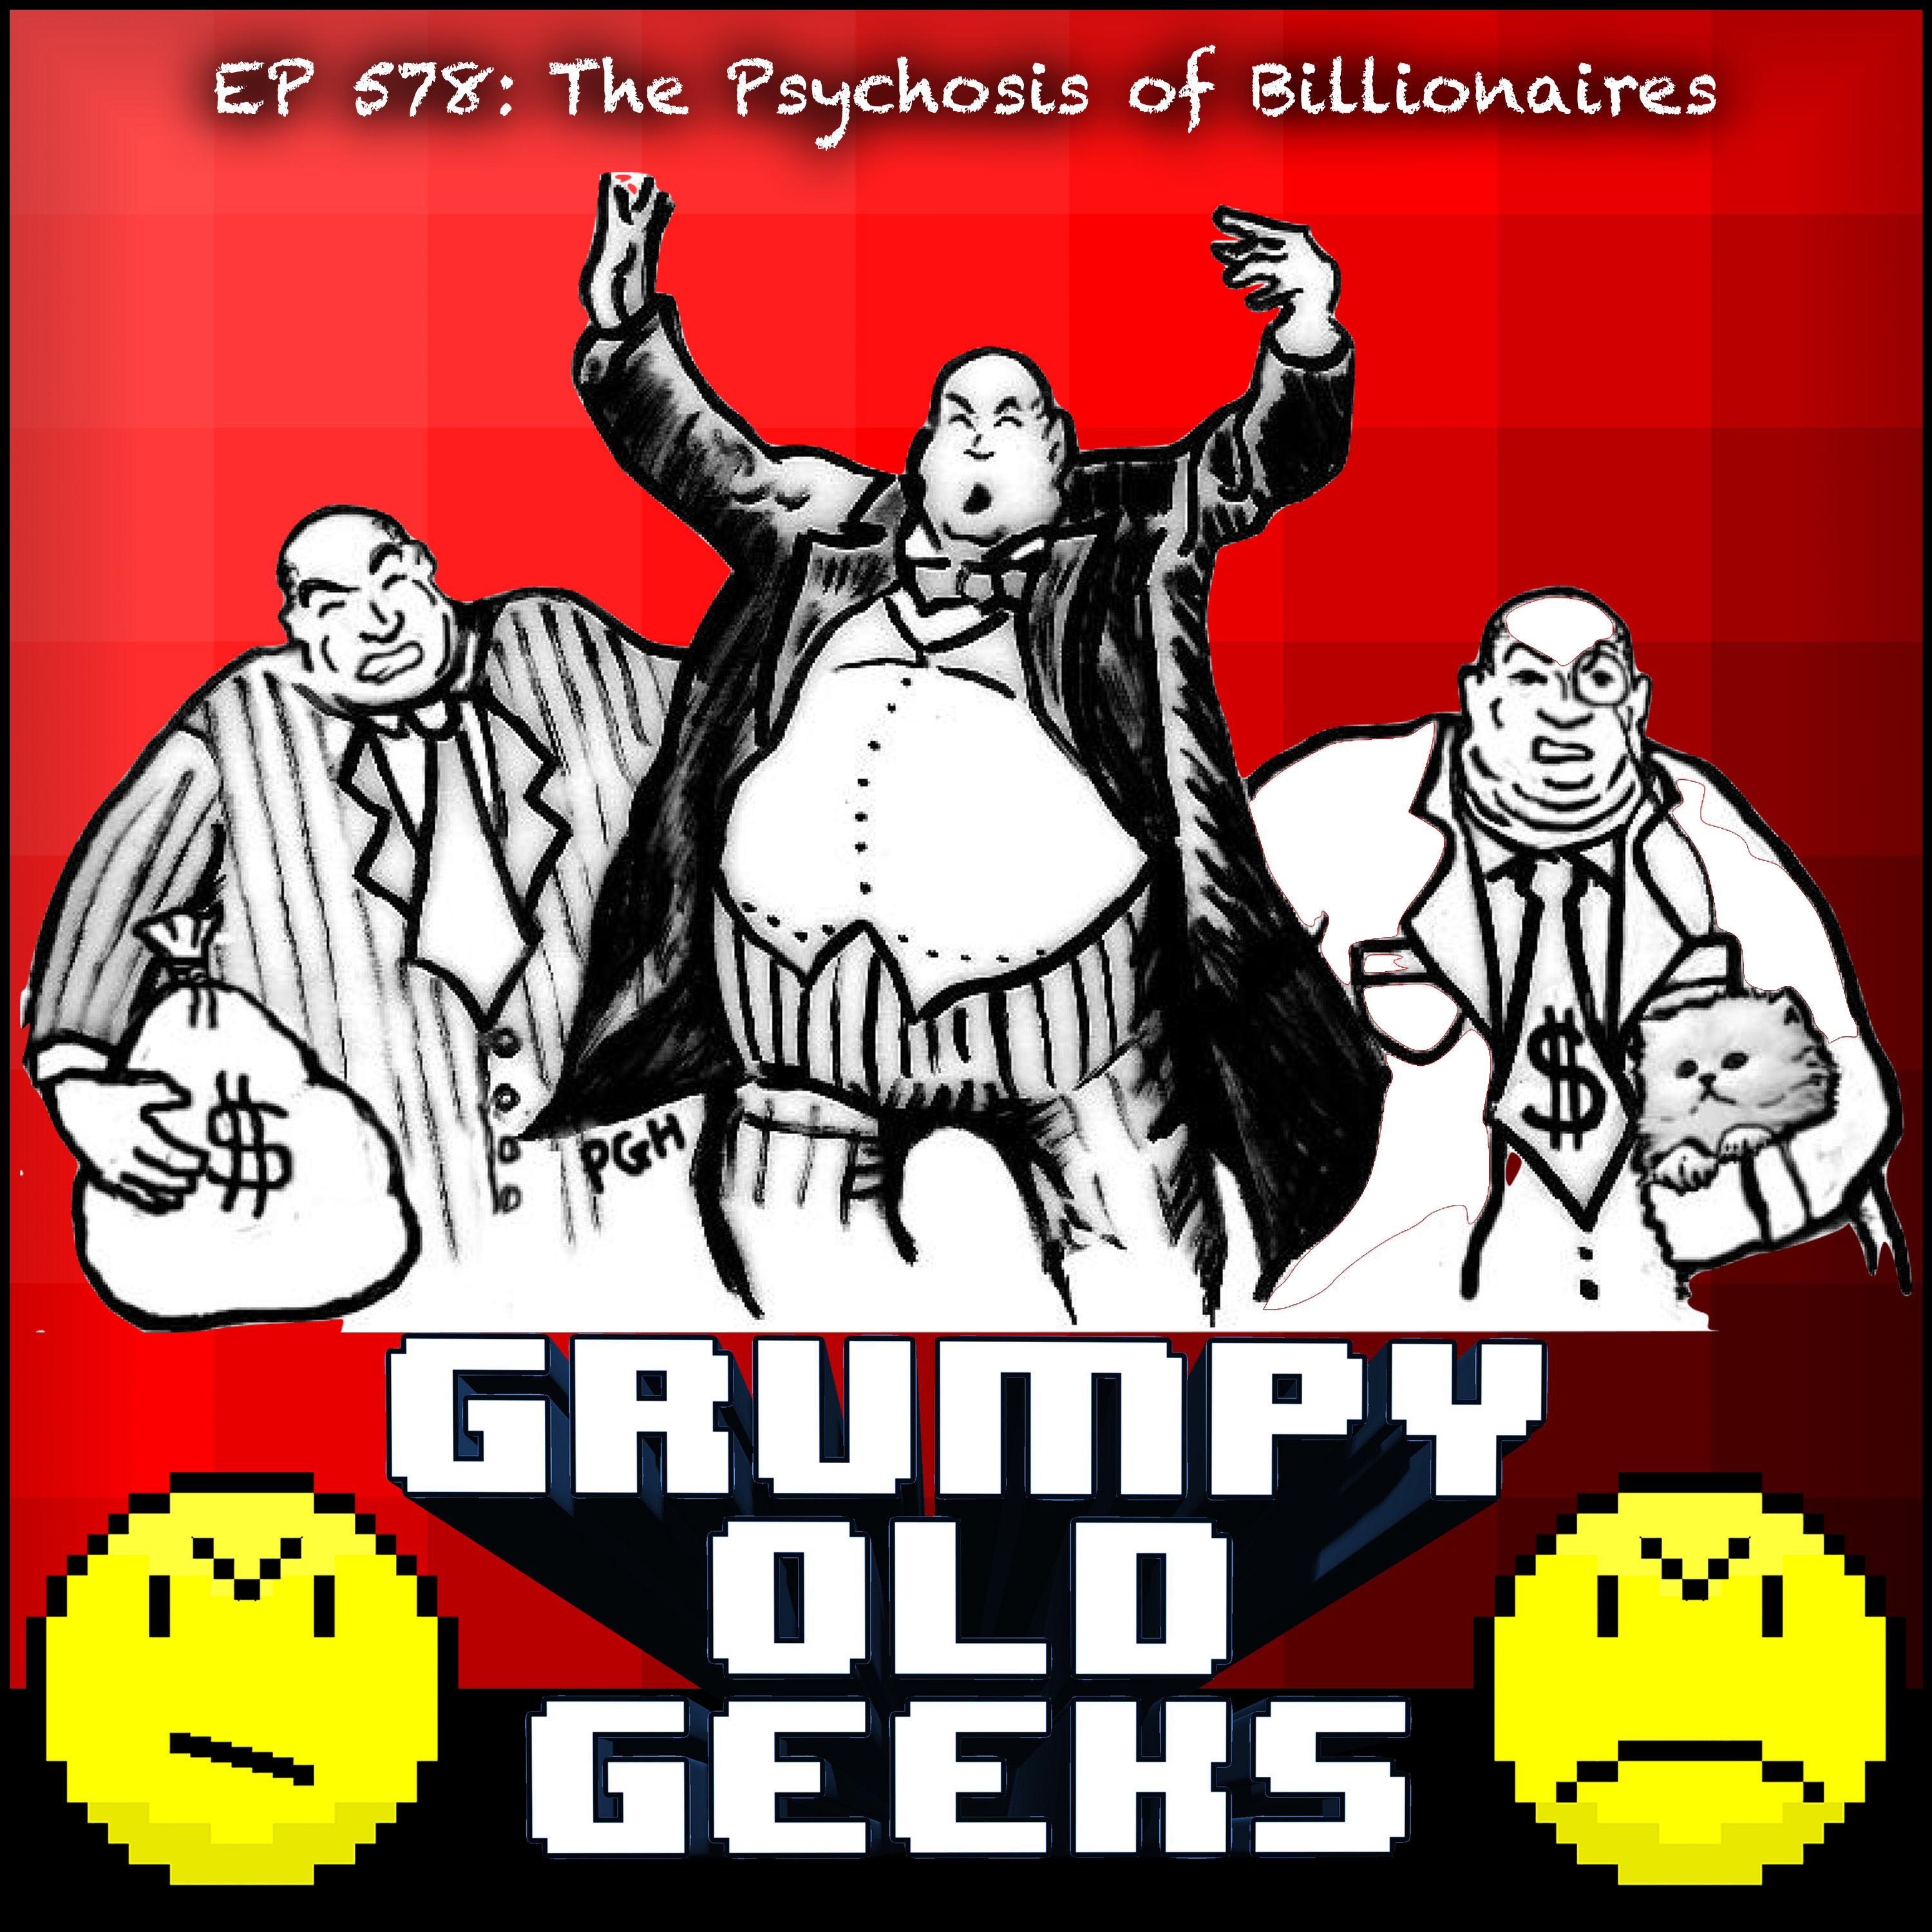 578: The Psychosis of Billionaires Image